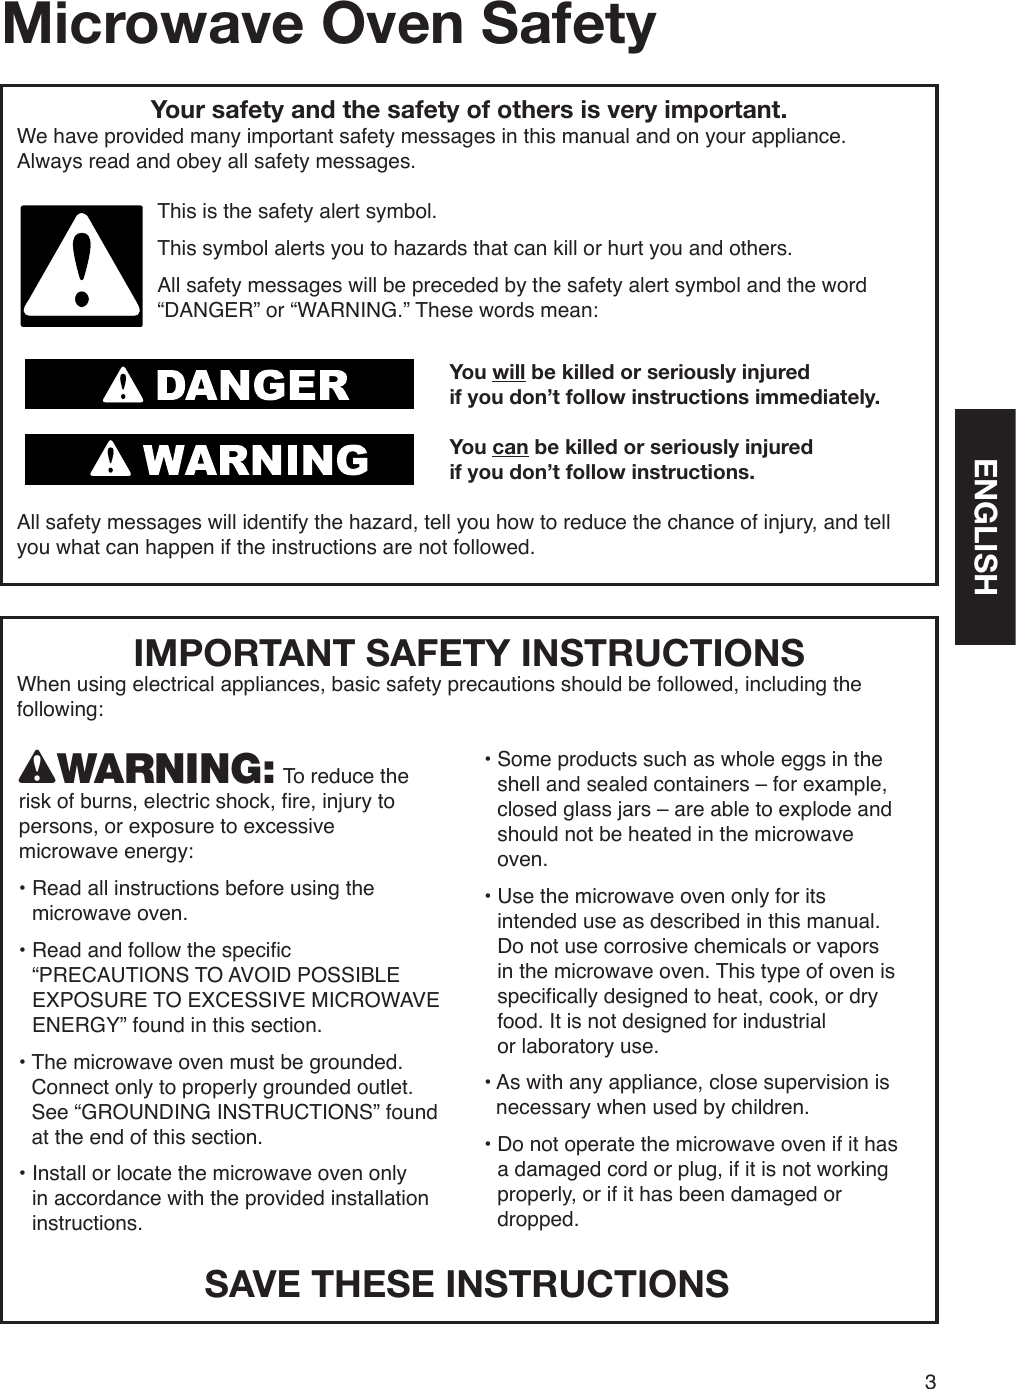 IMPORTANT SAFETY INSTRUCTIONSWhen using electrical appliances, basic safety precautions should be followed, including the following:3Microwave Oven SafetyYour safety and the safety of others is very important.We have provided many important safety messages in this manual and on your appliance.  Always read and obey all safety messages.This is the safety alert symbol.This symbol alerts you to hazards that can kill or hurt you and others.All safety messages will be preceded by the safety alert symbol and the word “DANGER” or “WARNING.” These words mean:You will be killed or seriously injuredif you don’t follow instructions immediately.You can be killed or seriously injuredif you don’t follow instructions.All safety messages will identify the hazard, tell you how to reduce the chance of injury, and tell you what can happen if the instructions are not followed.wWARNING: To reduce the risk of burns, electric shock, fire, injury to persons, or exposure to excessive  microwave energy:•  Read all instructions before using the microwave oven.•  Read and follow the specific “PRECAUTIONS TO AVOID POSSIBLE EXPOSURE TO EXCESSIVE MICROWAVE ENERGY” found in this section.•  The microwave oven must be grounded. Connect only to properly grounded outlet. See “GROUNDING INSTRUCTIONS” found at the end of this section.•  Install or locate the microwave oven only  in accordance with the provided installation instructions.•  Some products such as whole eggs in the shell and sealed containers – for example, closed glass jars – are able to explode and should not be heated in the microwave oven.•  Use the microwave oven only for its intended use as described in this manual. Do not use corrosive chemicals or vapors in the microwave oven. This type of oven is specifically designed to heat, cook, or dry food. It is not designed for industrial  or laboratory use.•  As with any appliance, close supervision is necessary when used by children.•  Do not operate the microwave oven if it has a damaged cord or plug, if it is not working properly, or if it has been damaged or dropped.SAVE THESE INSTRUCTIONSENGLISH